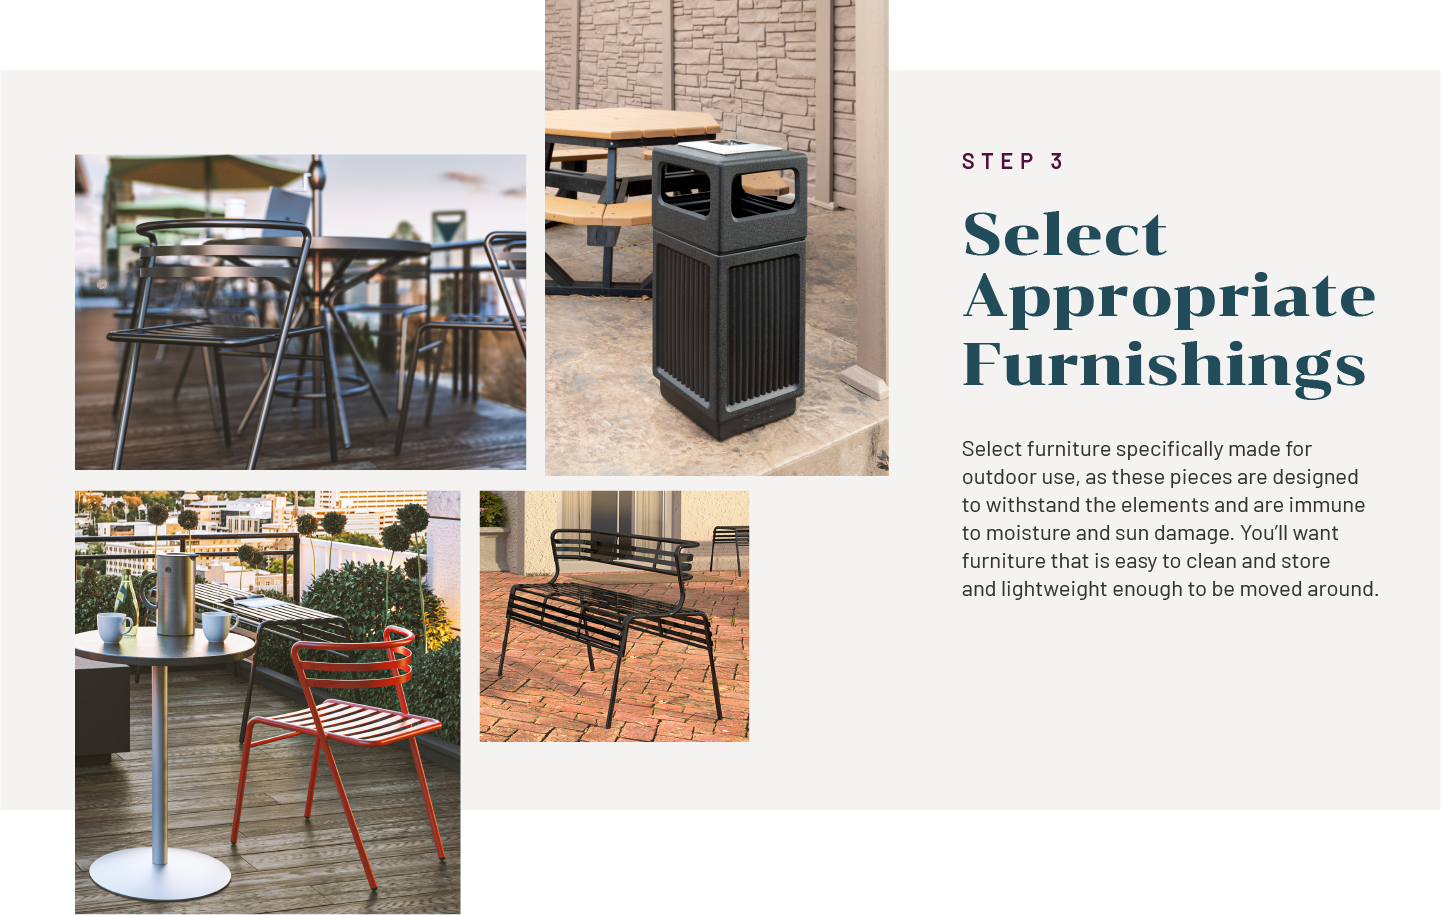 Safco_Perspectives_Outdoor_AppropriateFurnishings_2